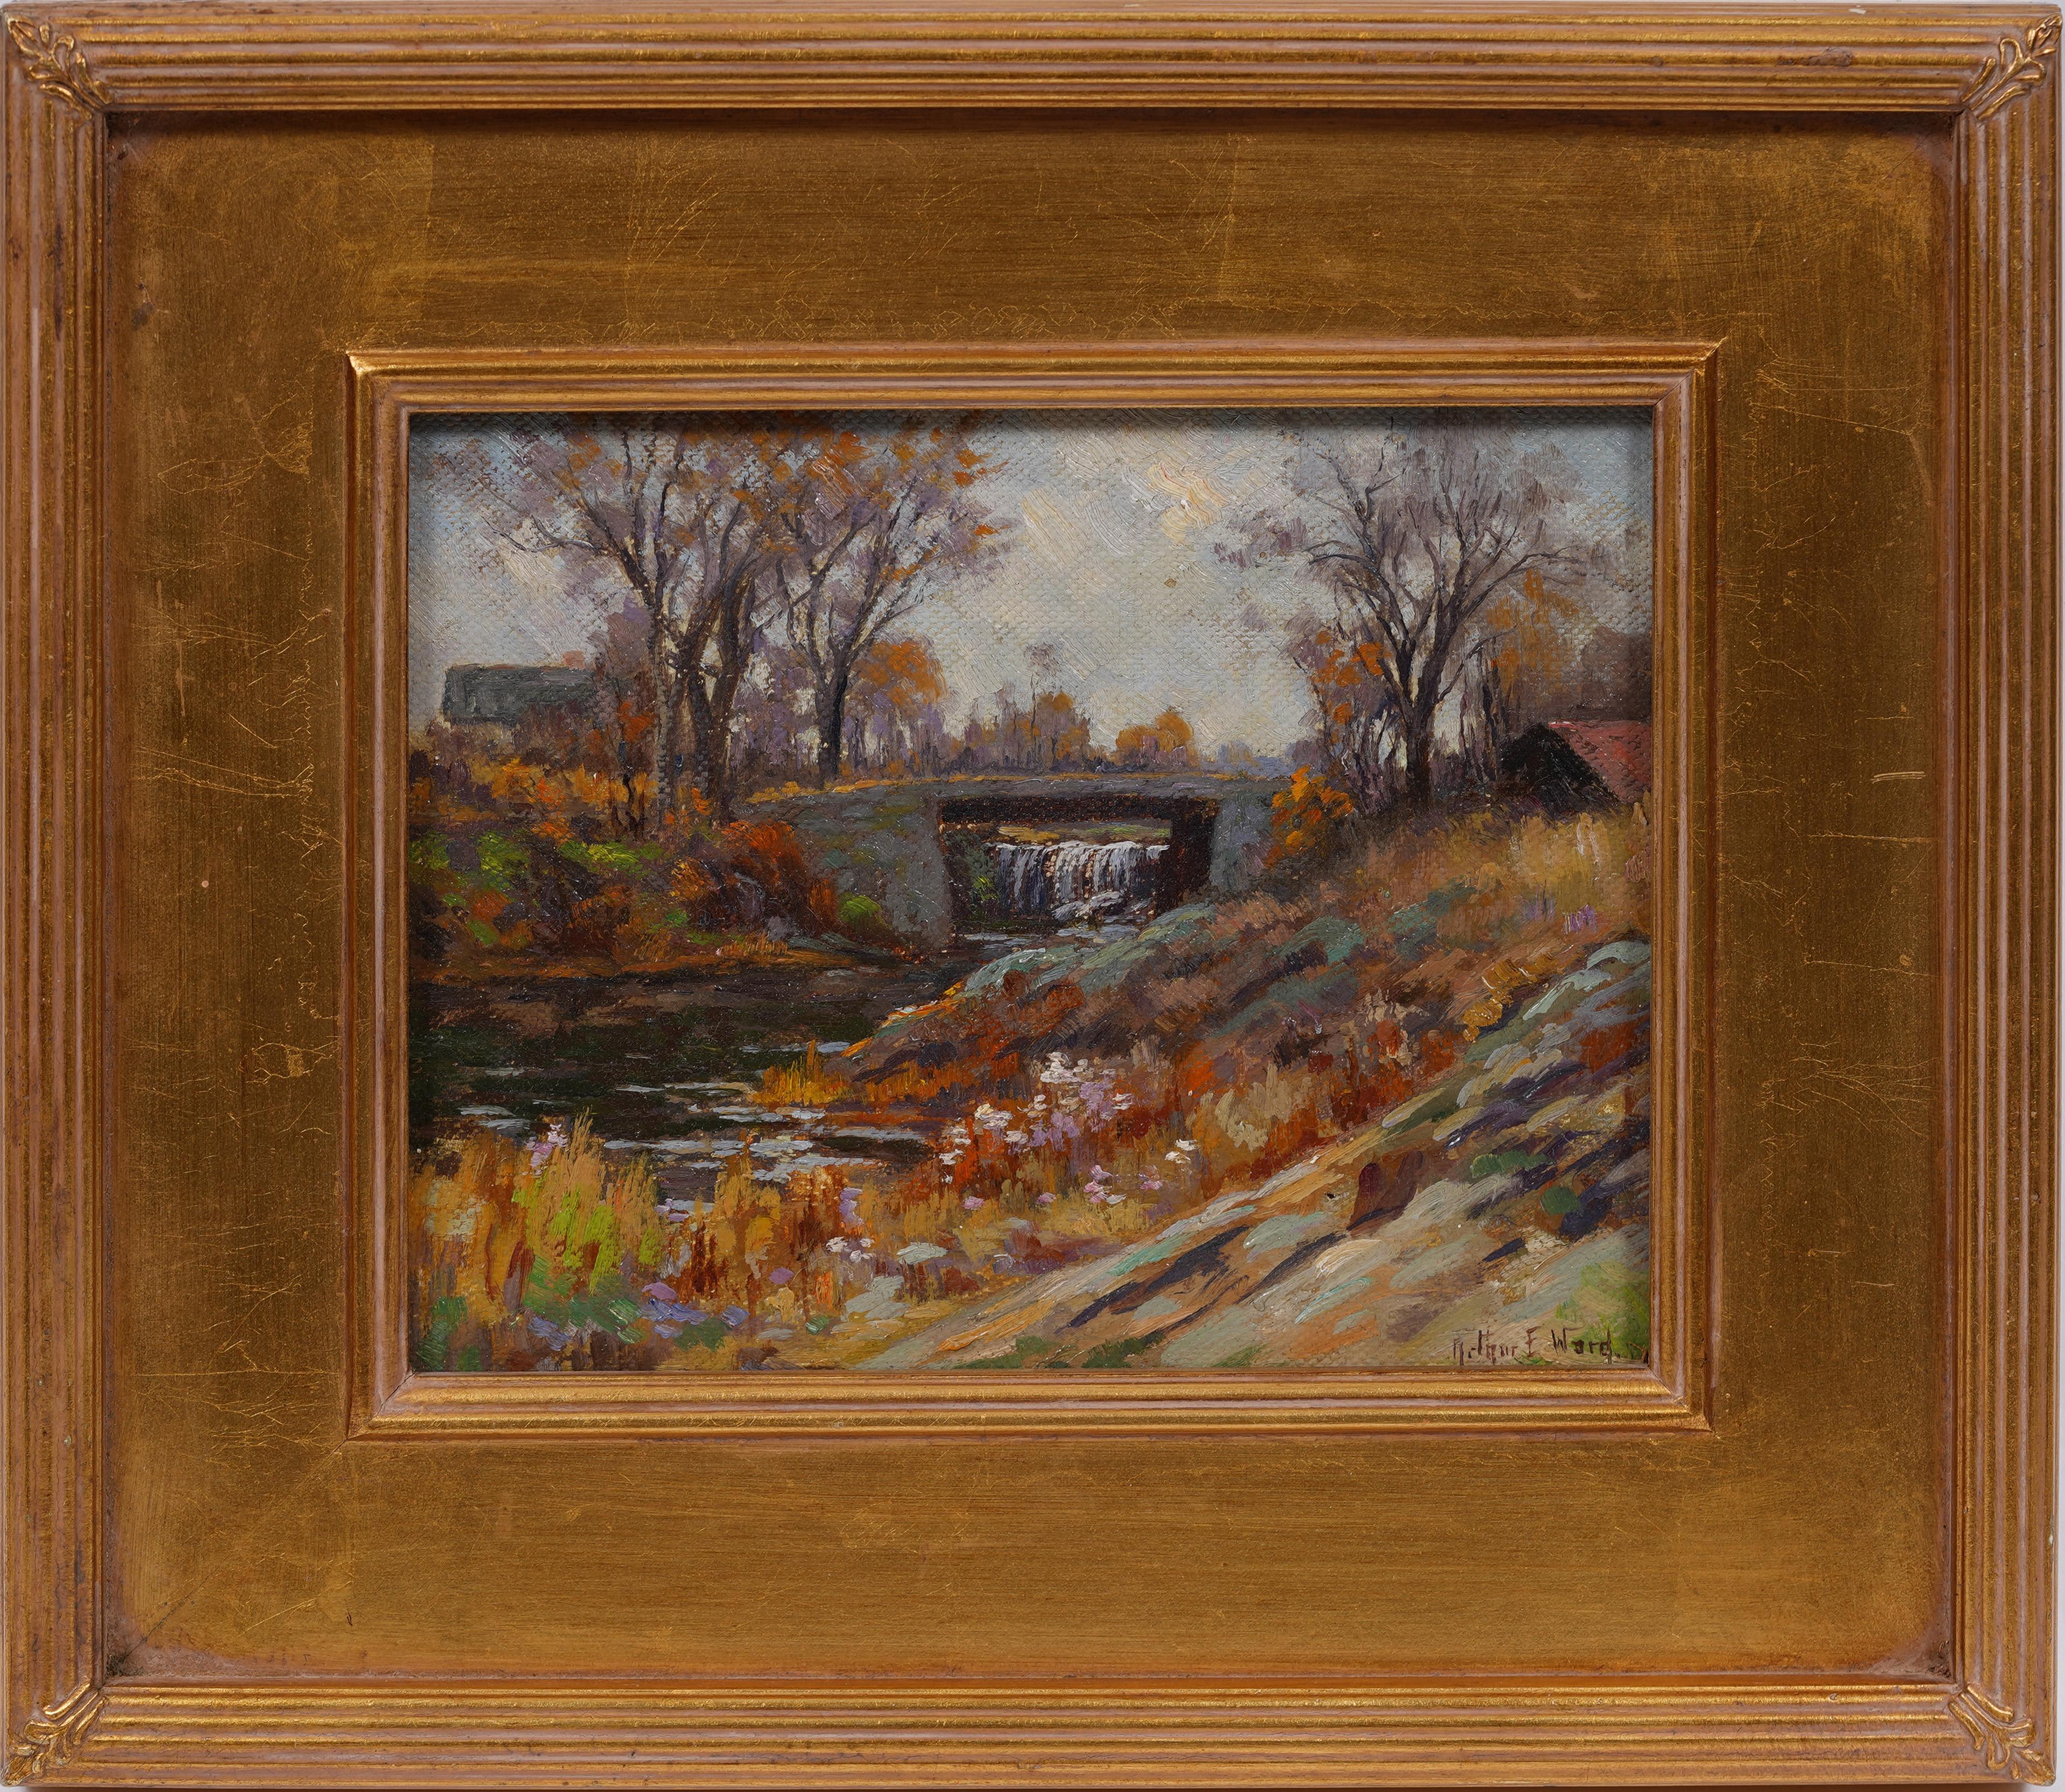 Antique American impressionist landscape oil painting by Arthur E. Ward (1863 - 1928).  OIl on board.  Framed.  Signed.